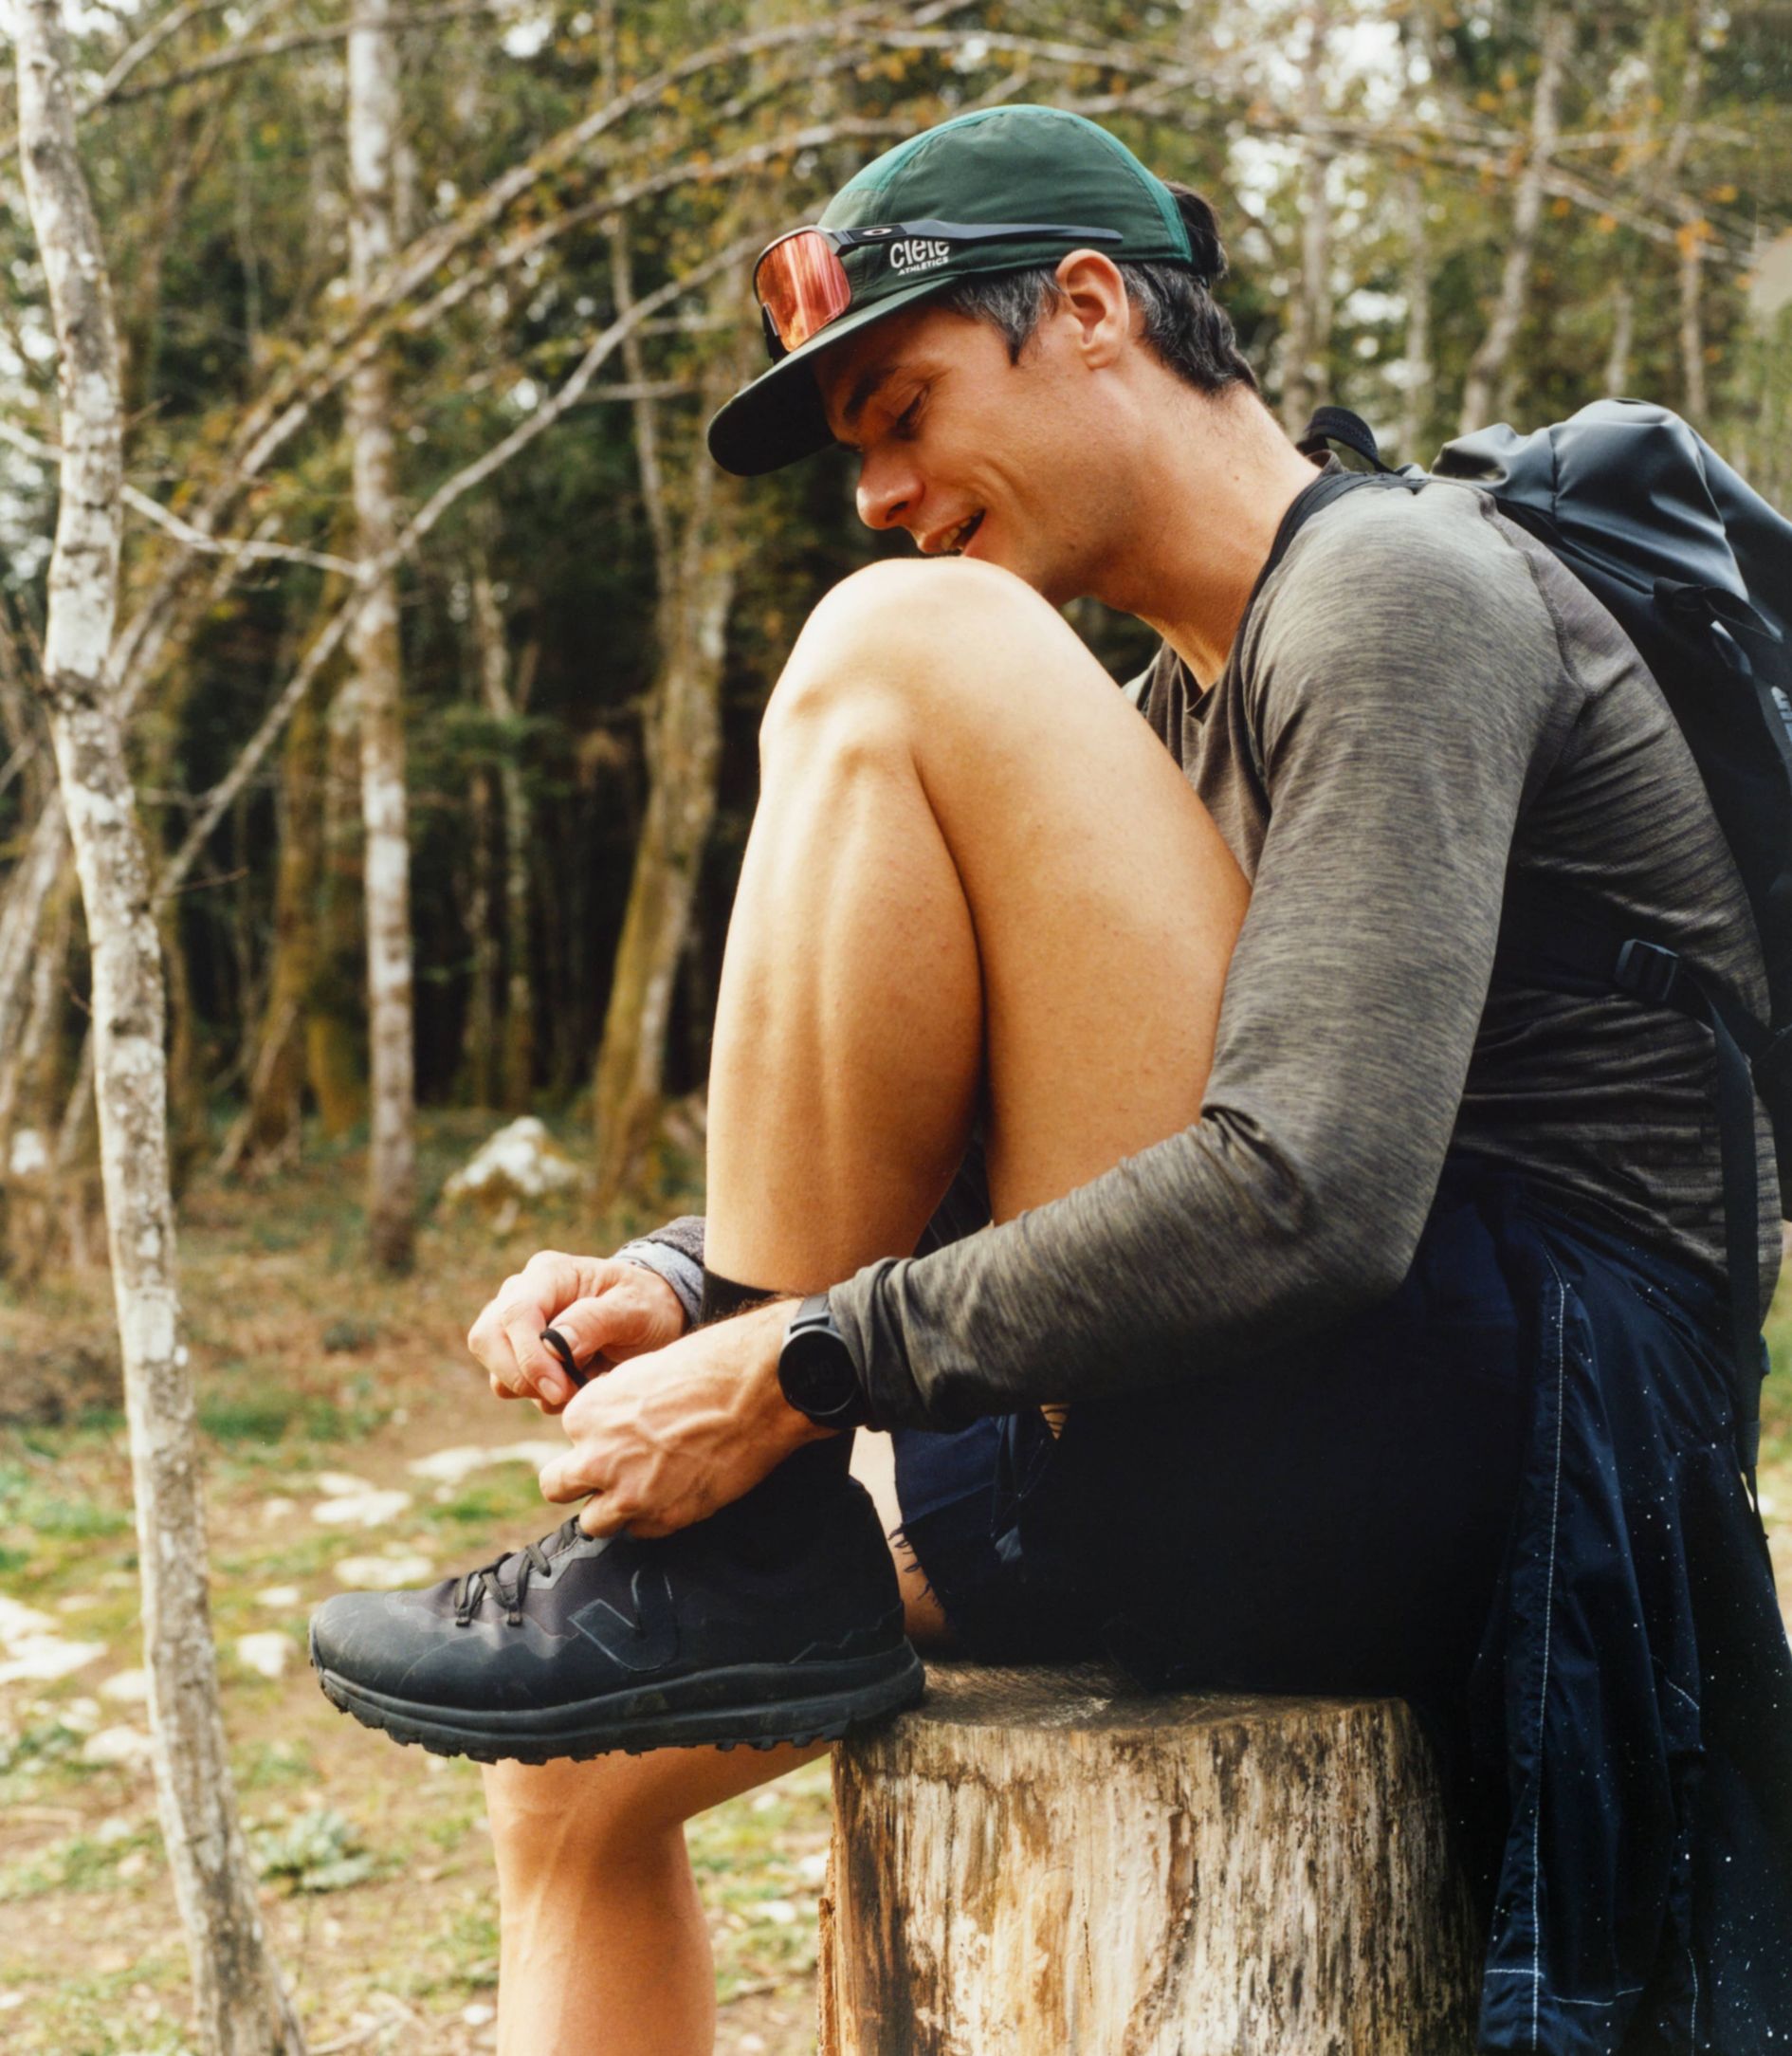 A man ties his shoes while sitting on a stump in the outdoors.